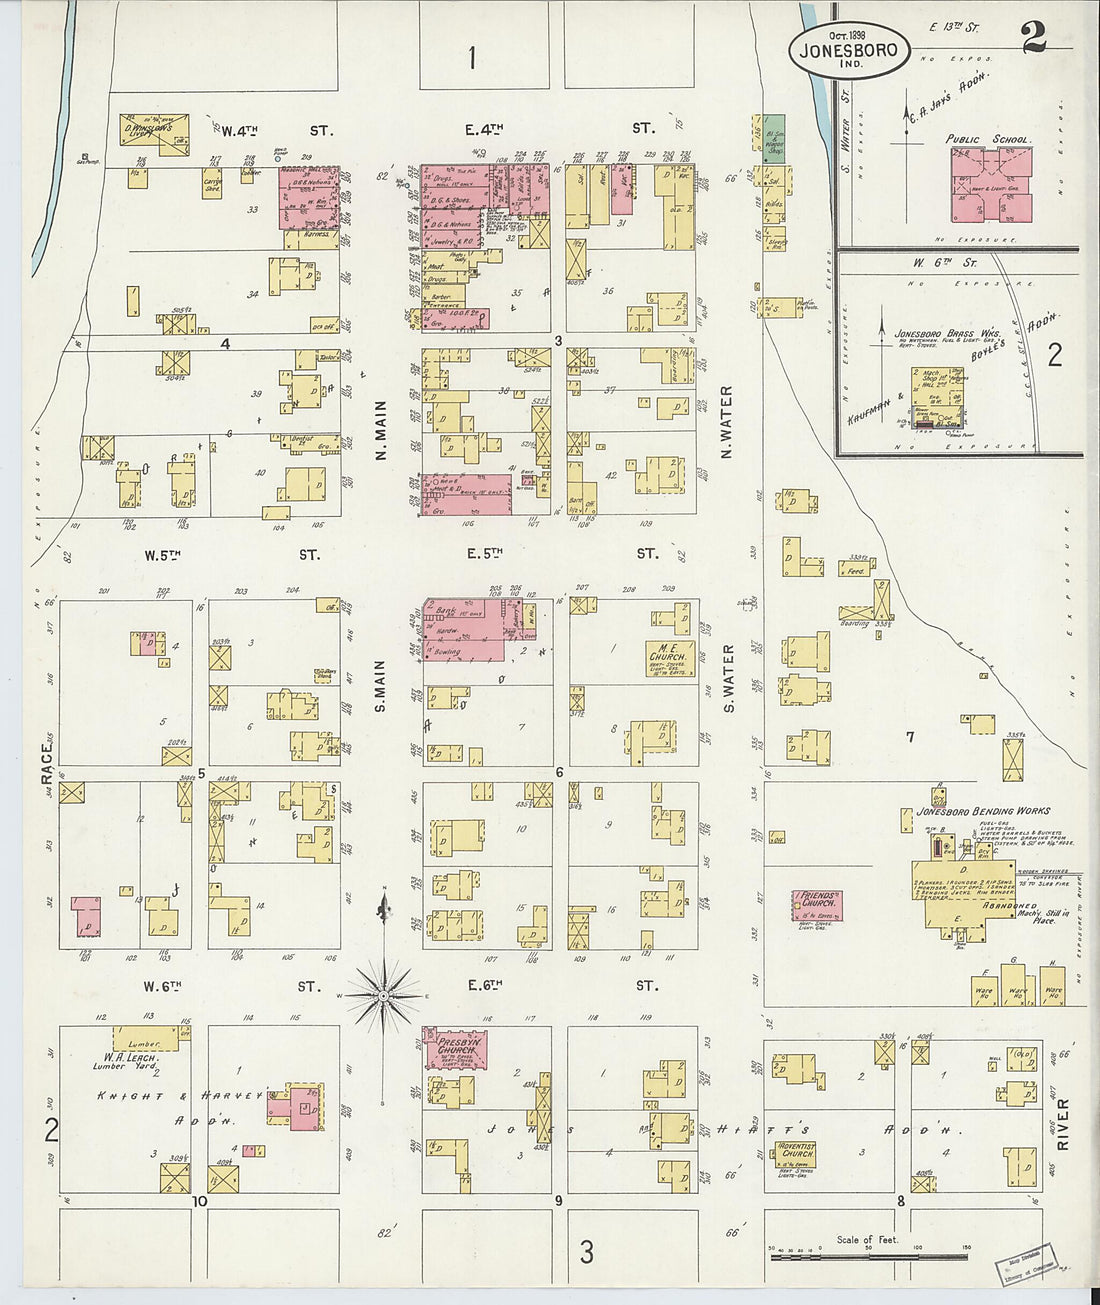 This old map of Jonesboro, Grant County, Indiana was created by Sanborn Map Company in 1898